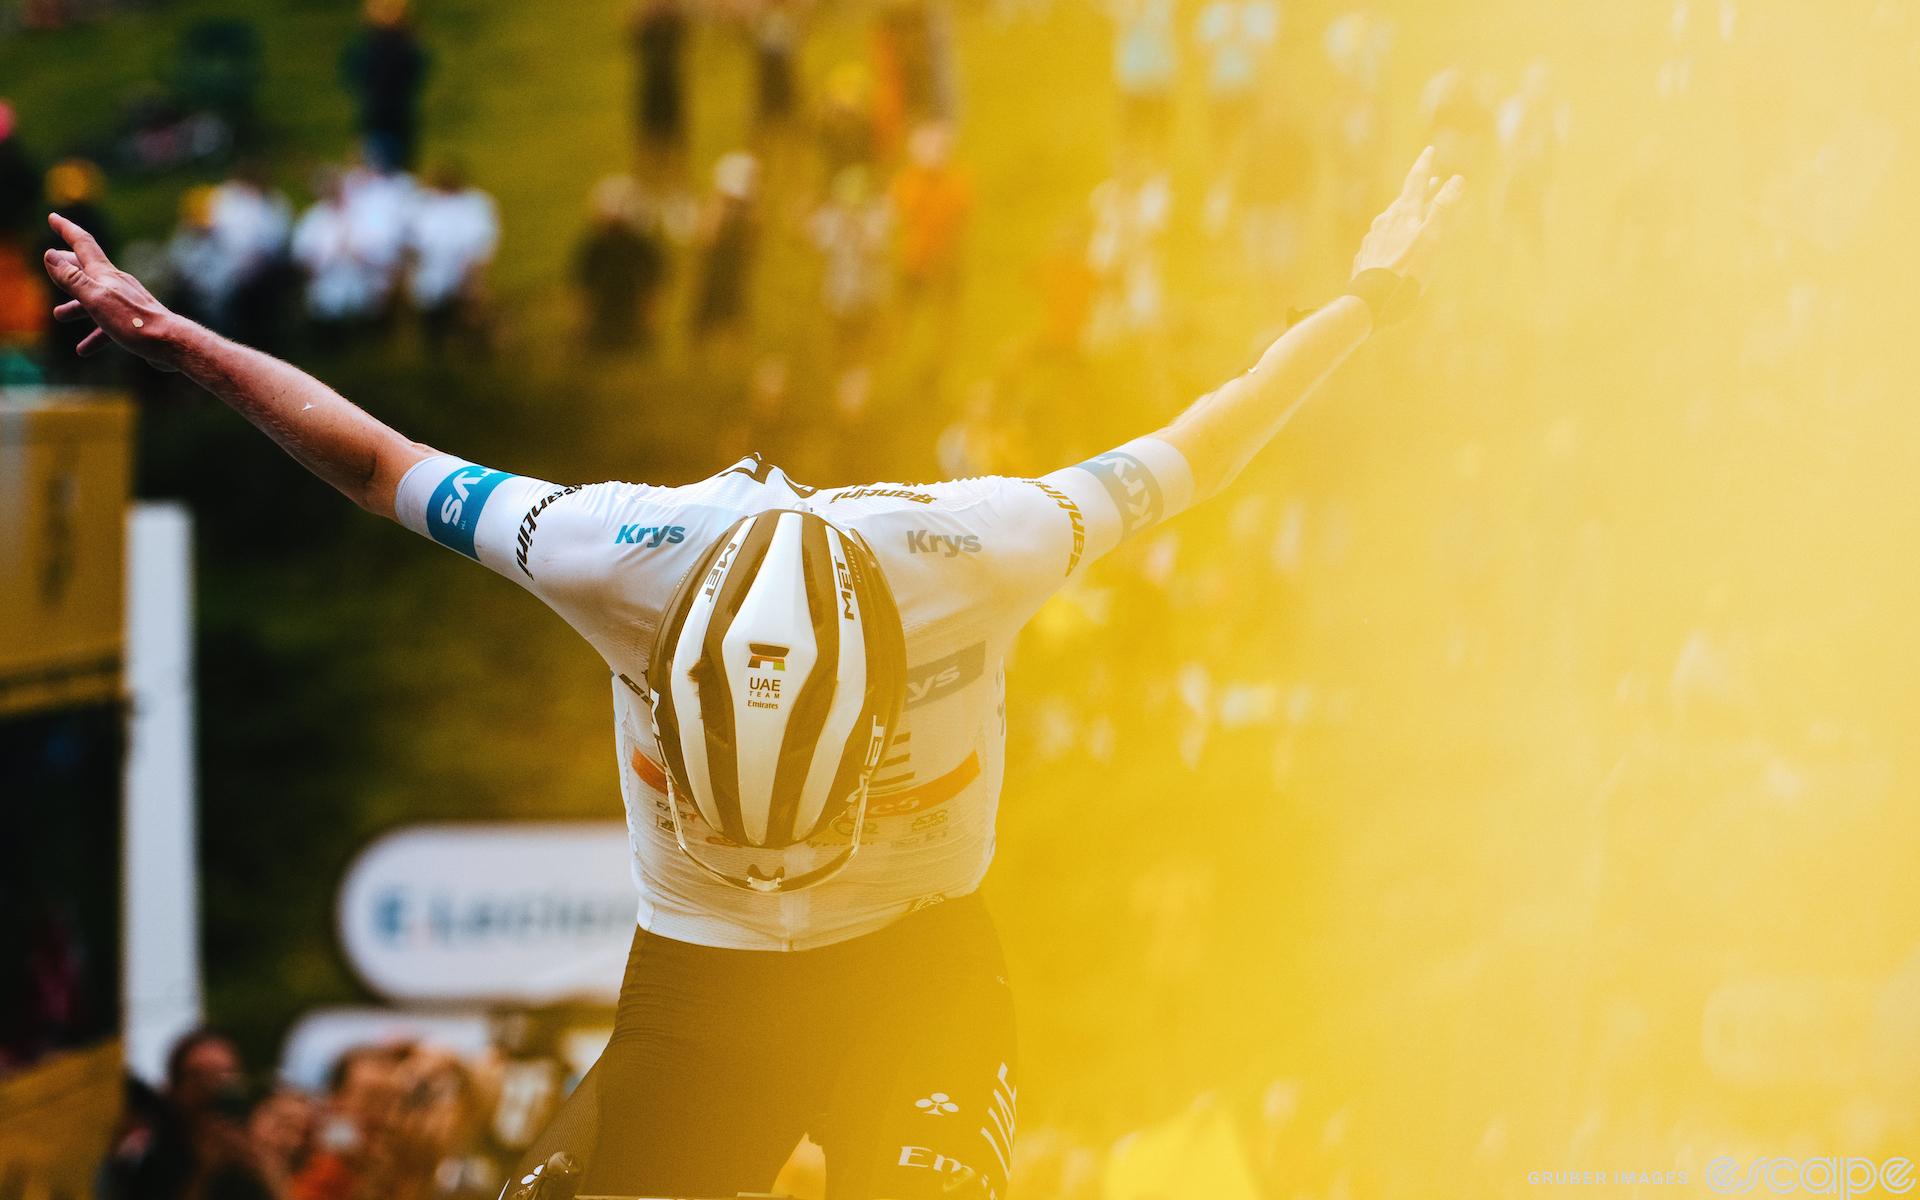 Tadej Pogačar bows theatrically as he crosses the line to win stage 6 of the 2023 Tour de France. The shot is filmed on the right half with a yellow haze, as if to suggest a yellow jersey.